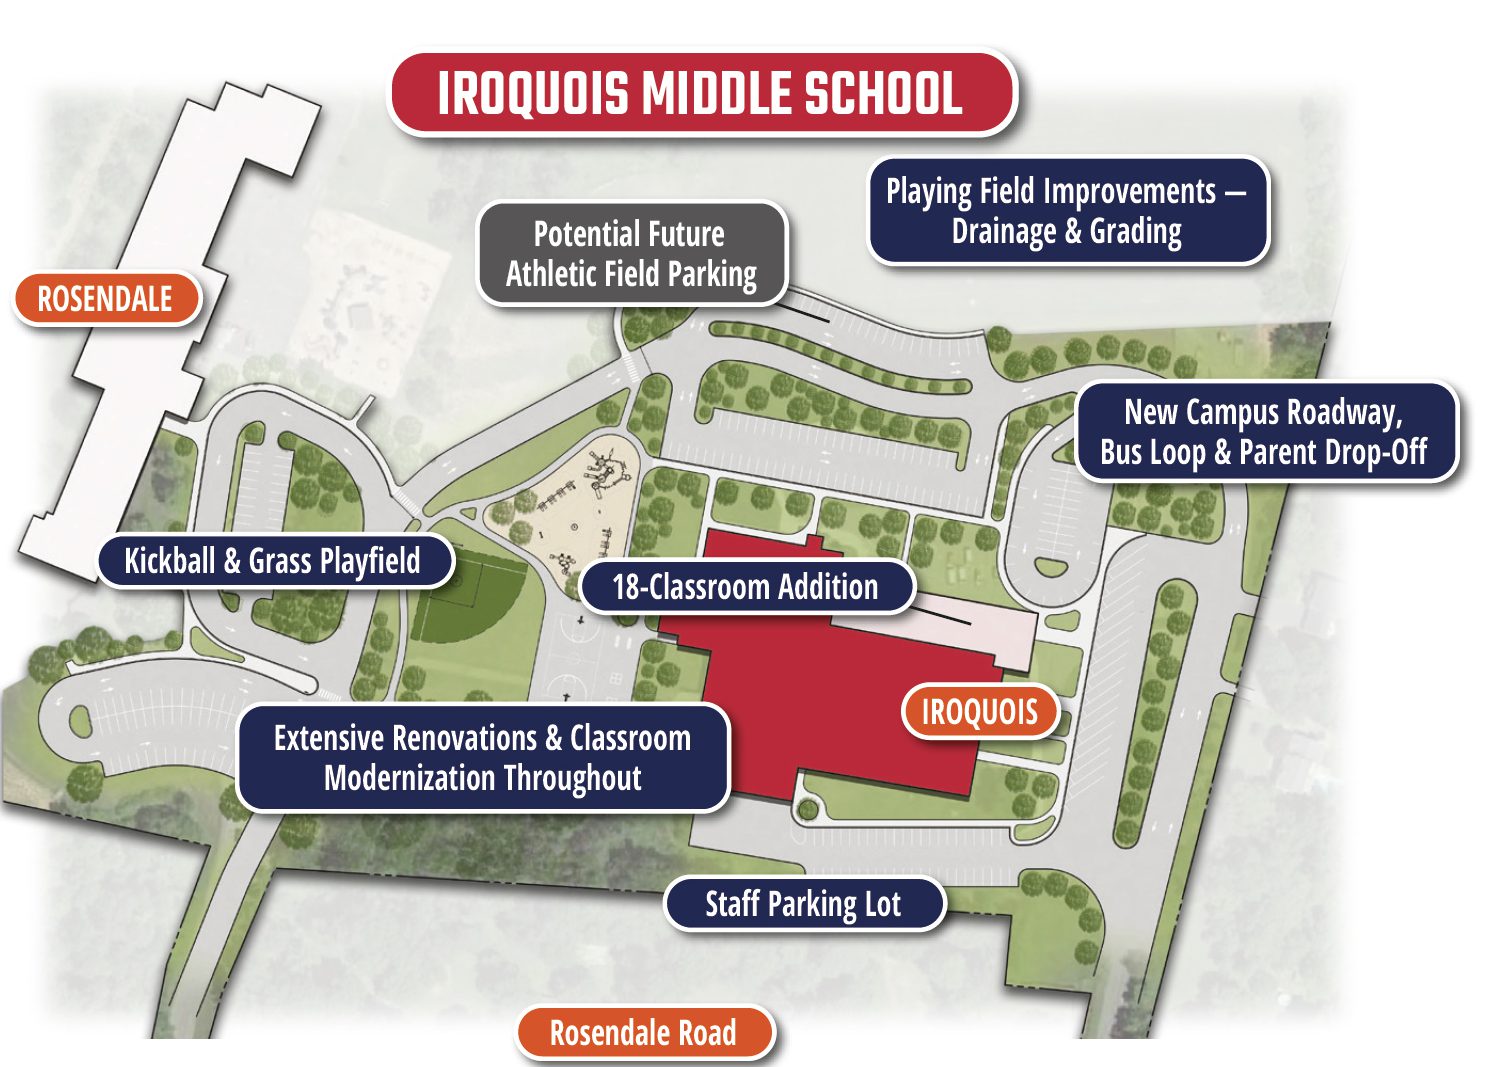 Iroquois Middle School Site Plan with proposed improvements